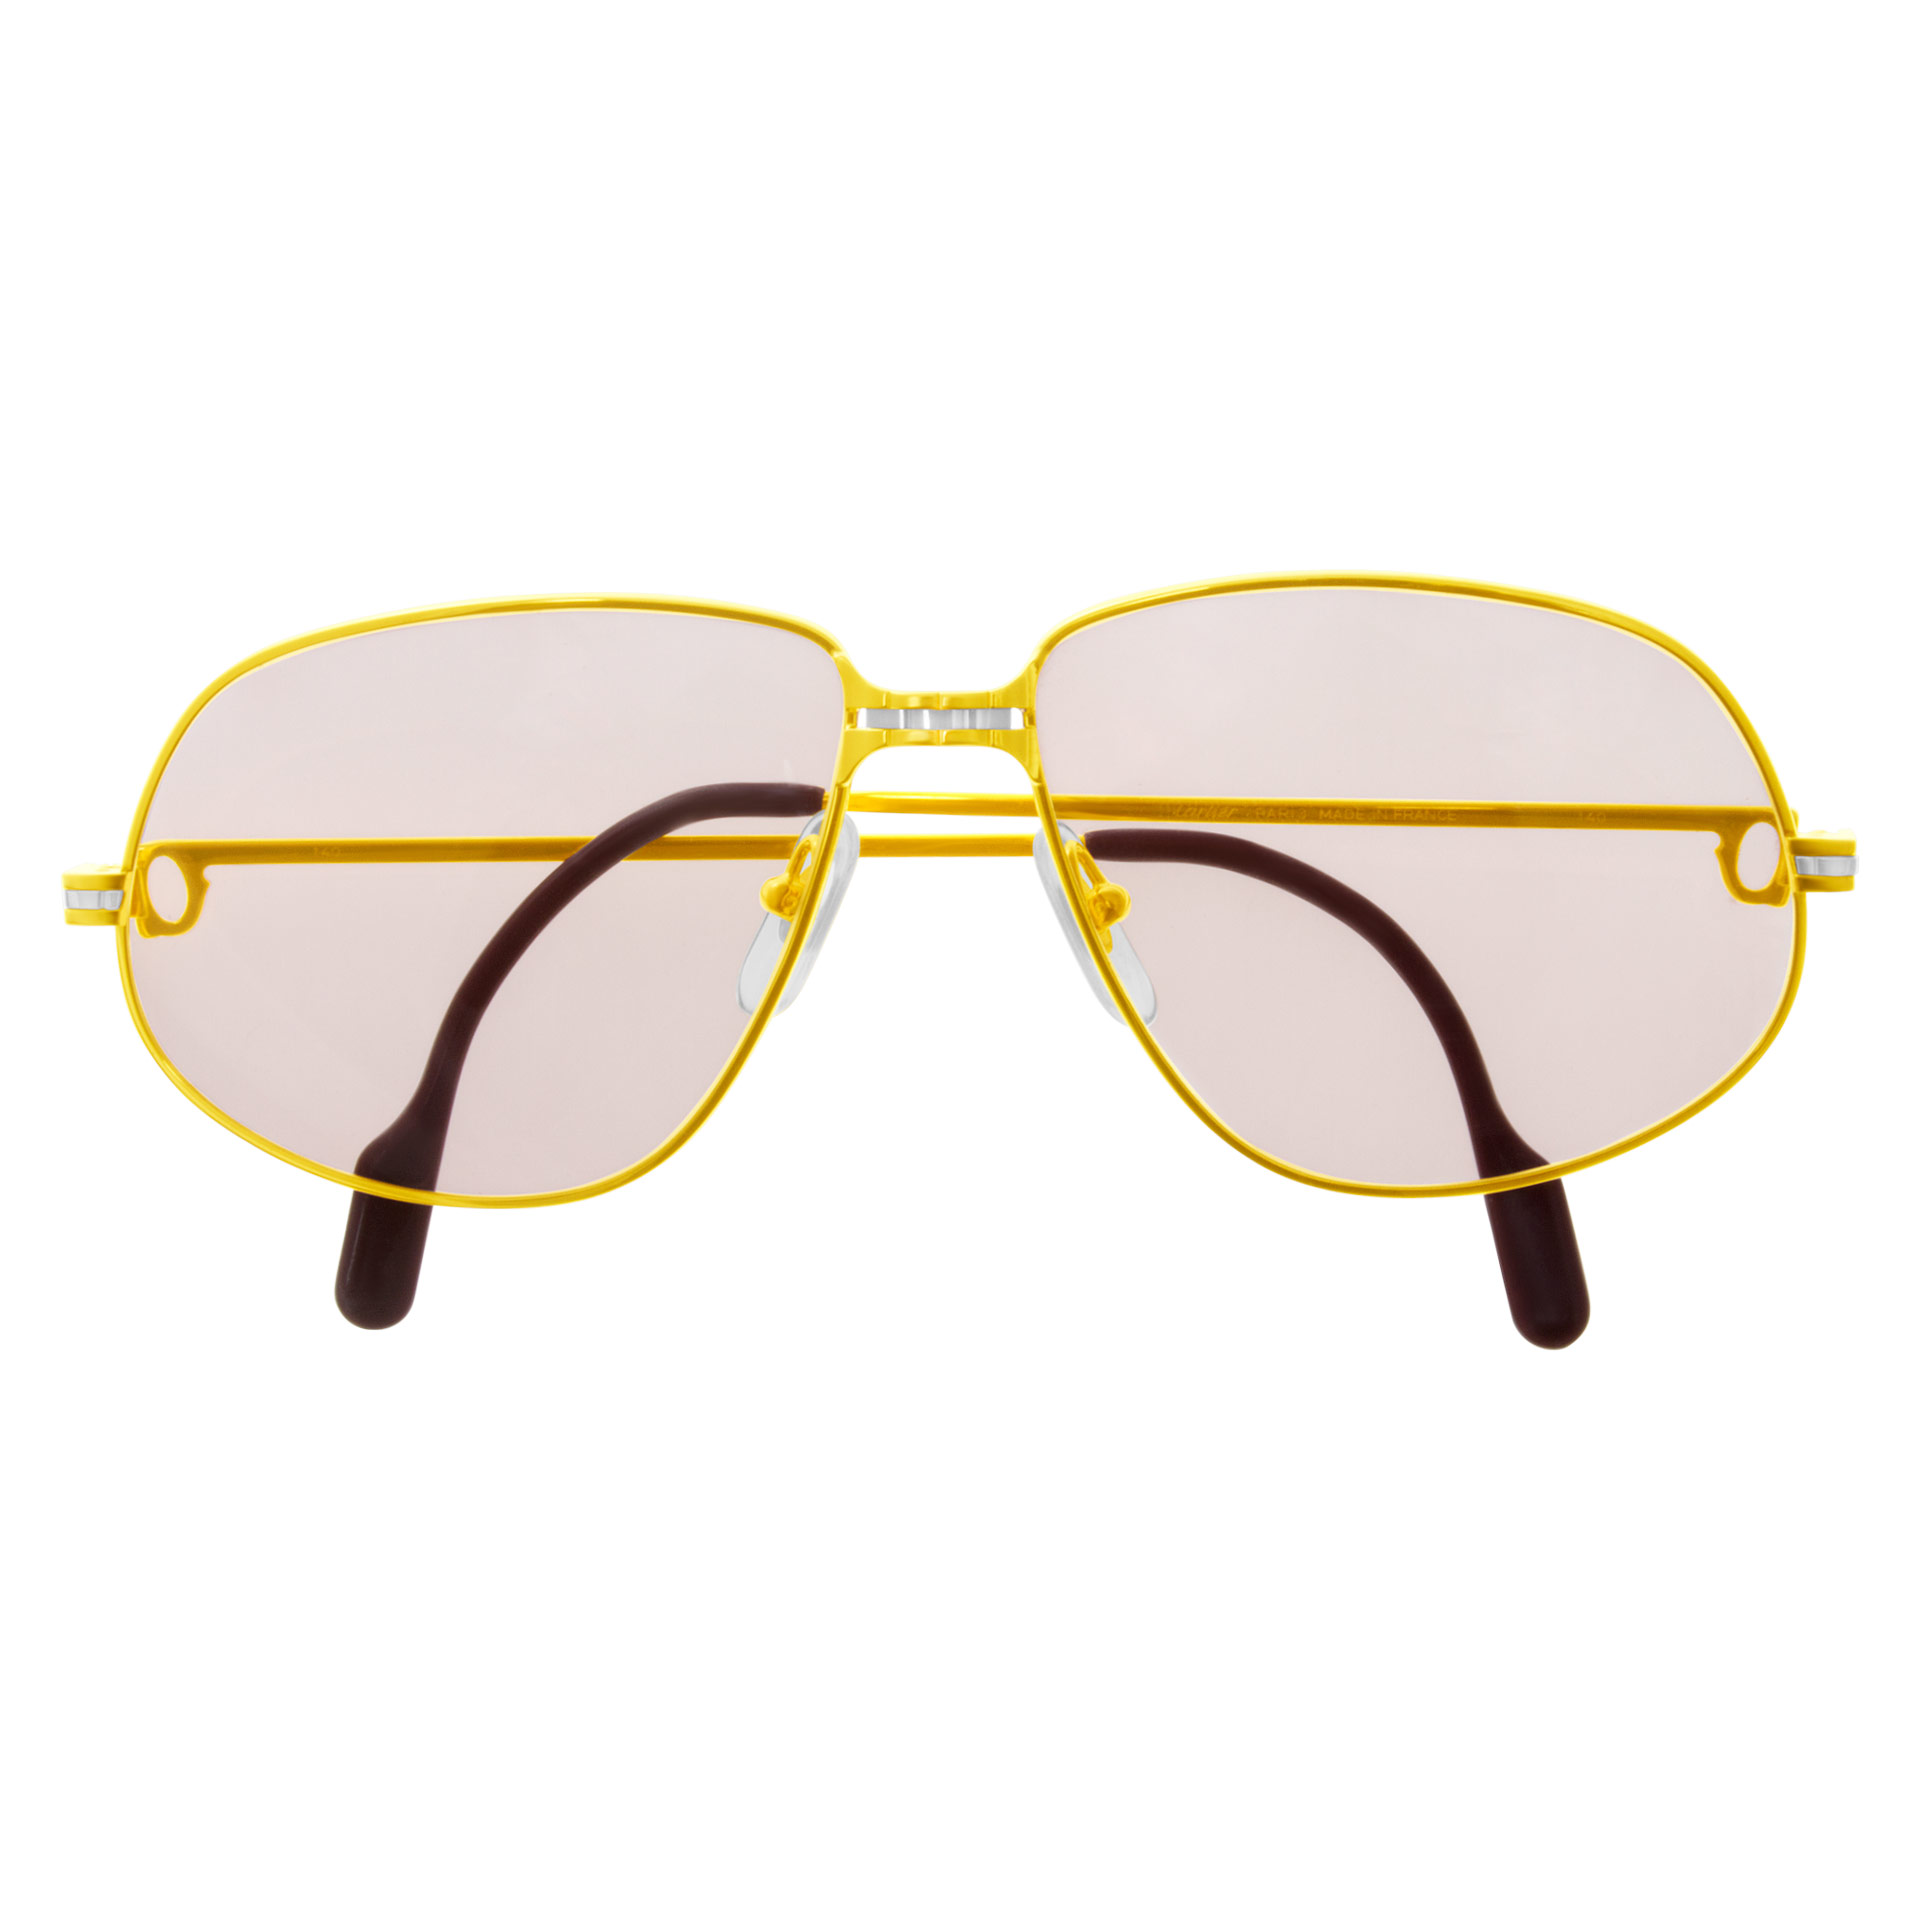 Cartier Panthere Glasses image 1